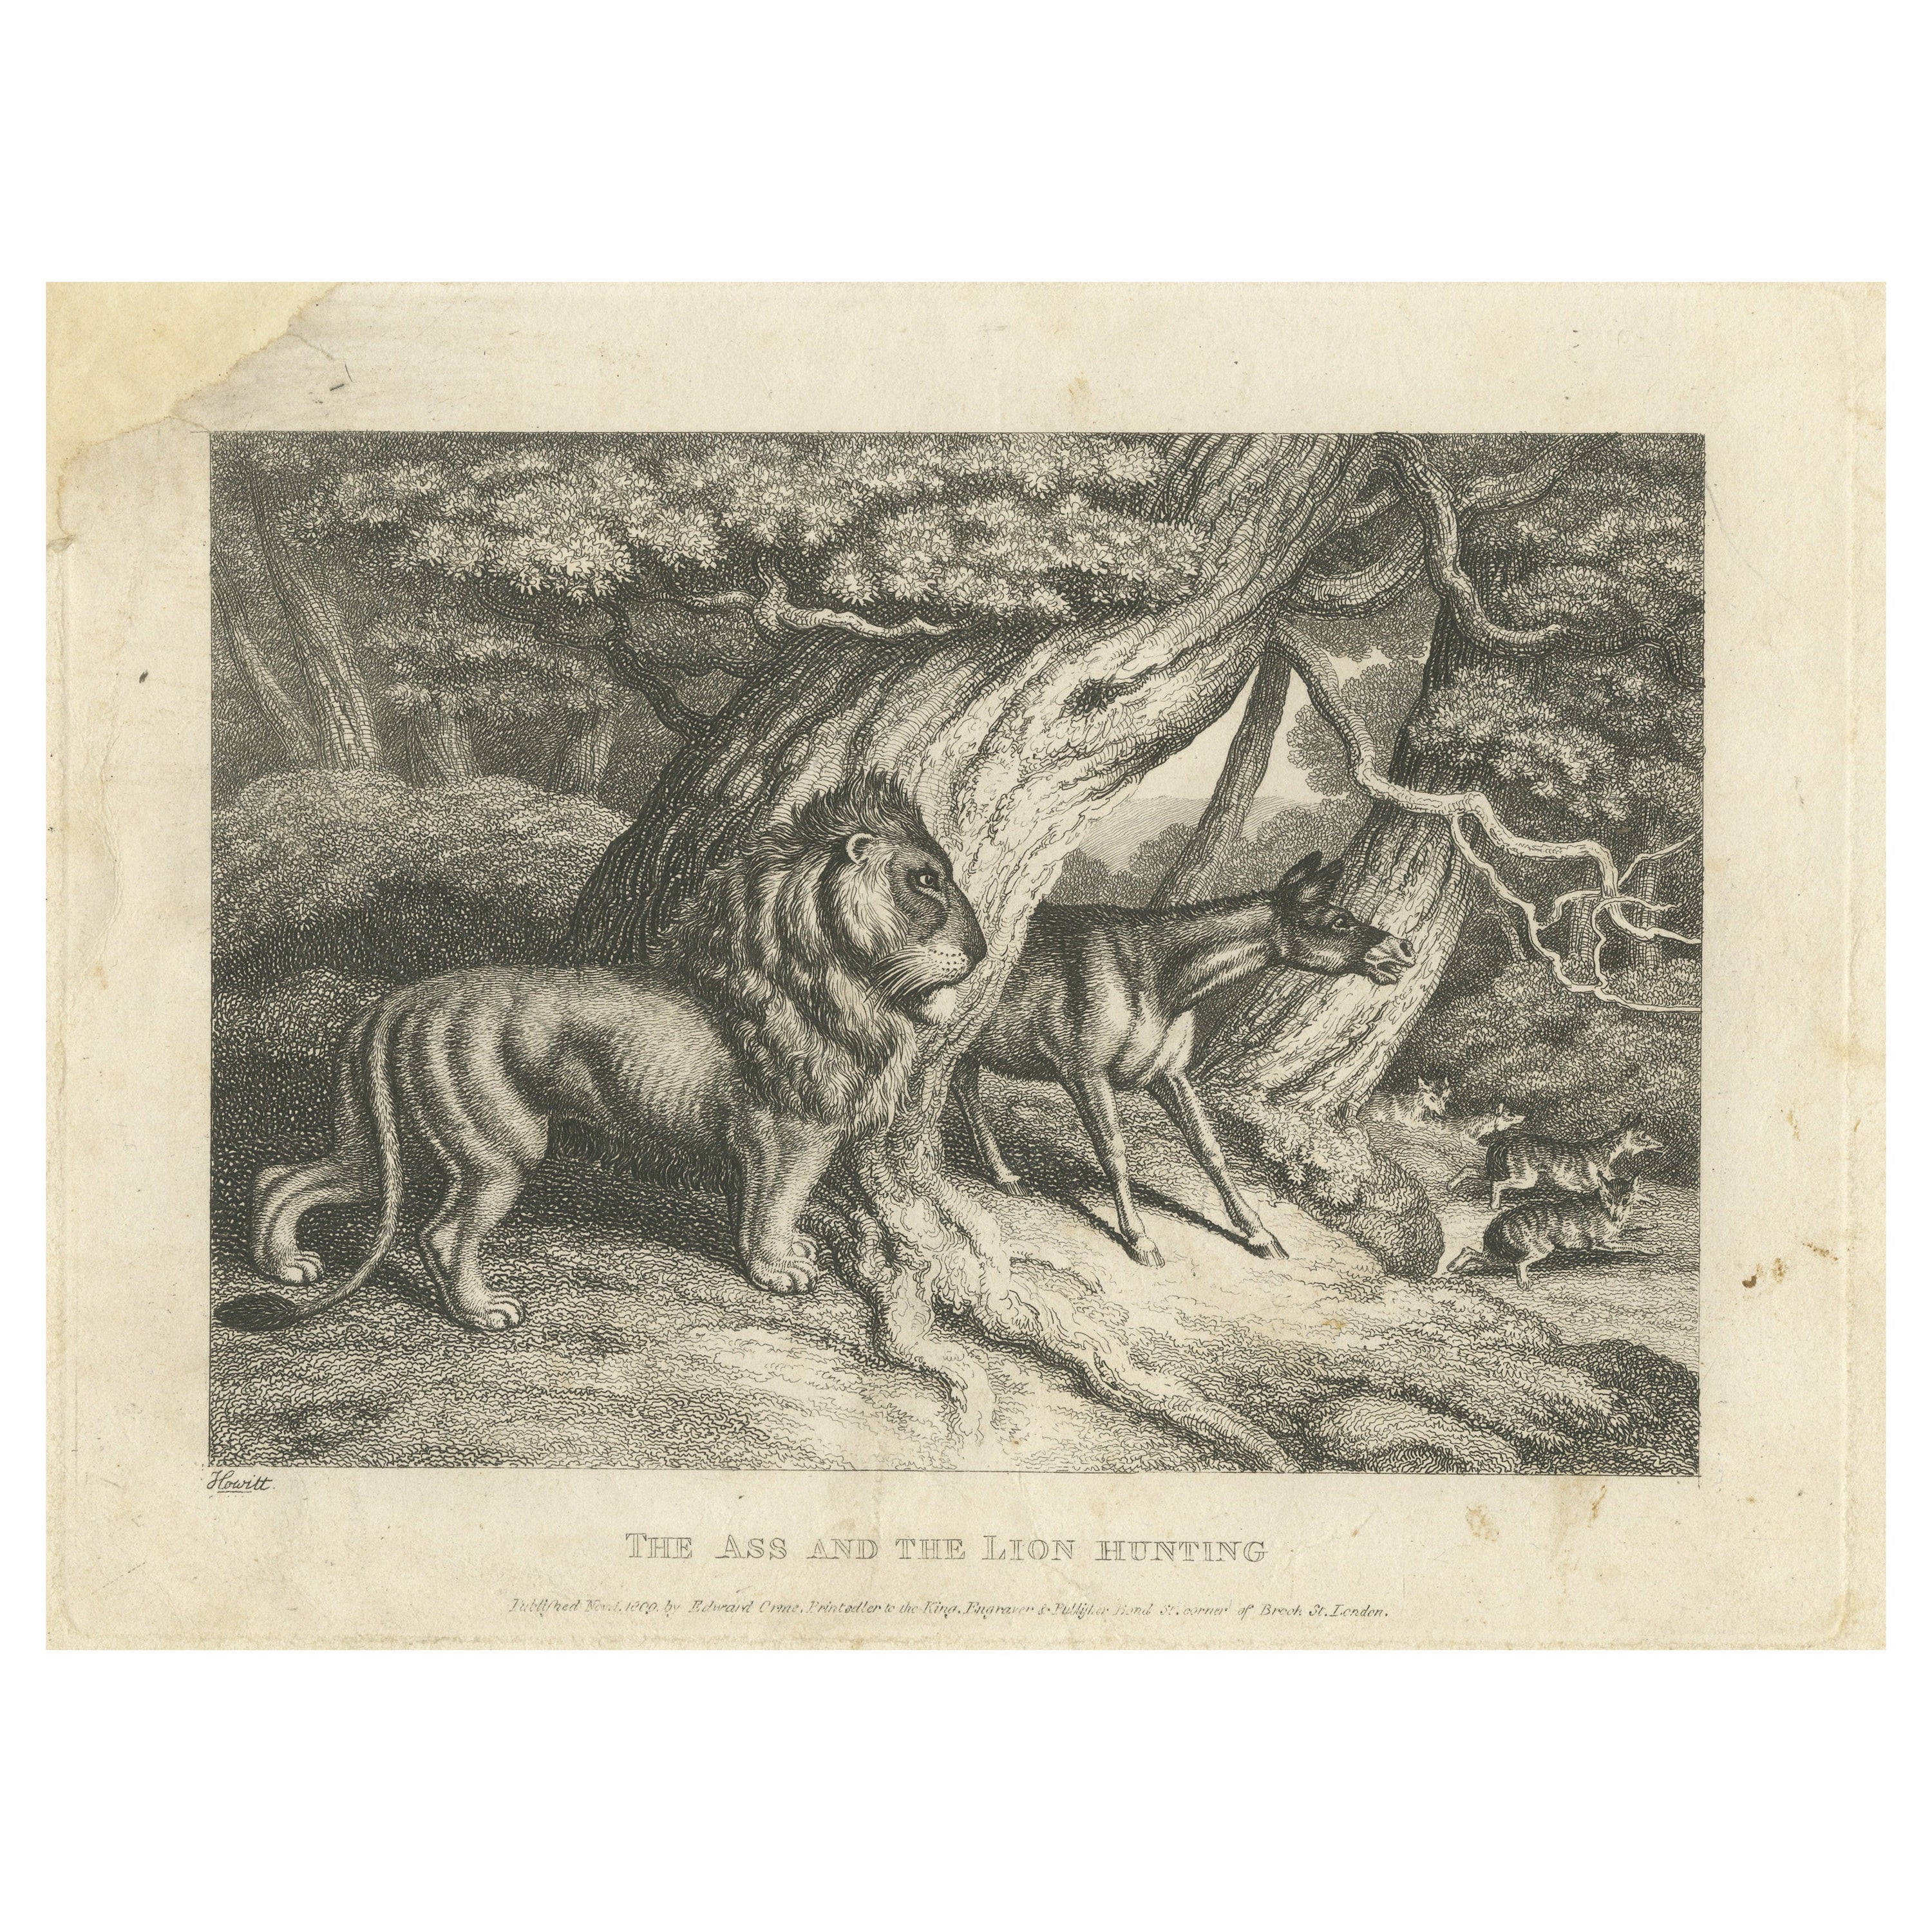 Original Antique Print of a Lion and Donkey hunting